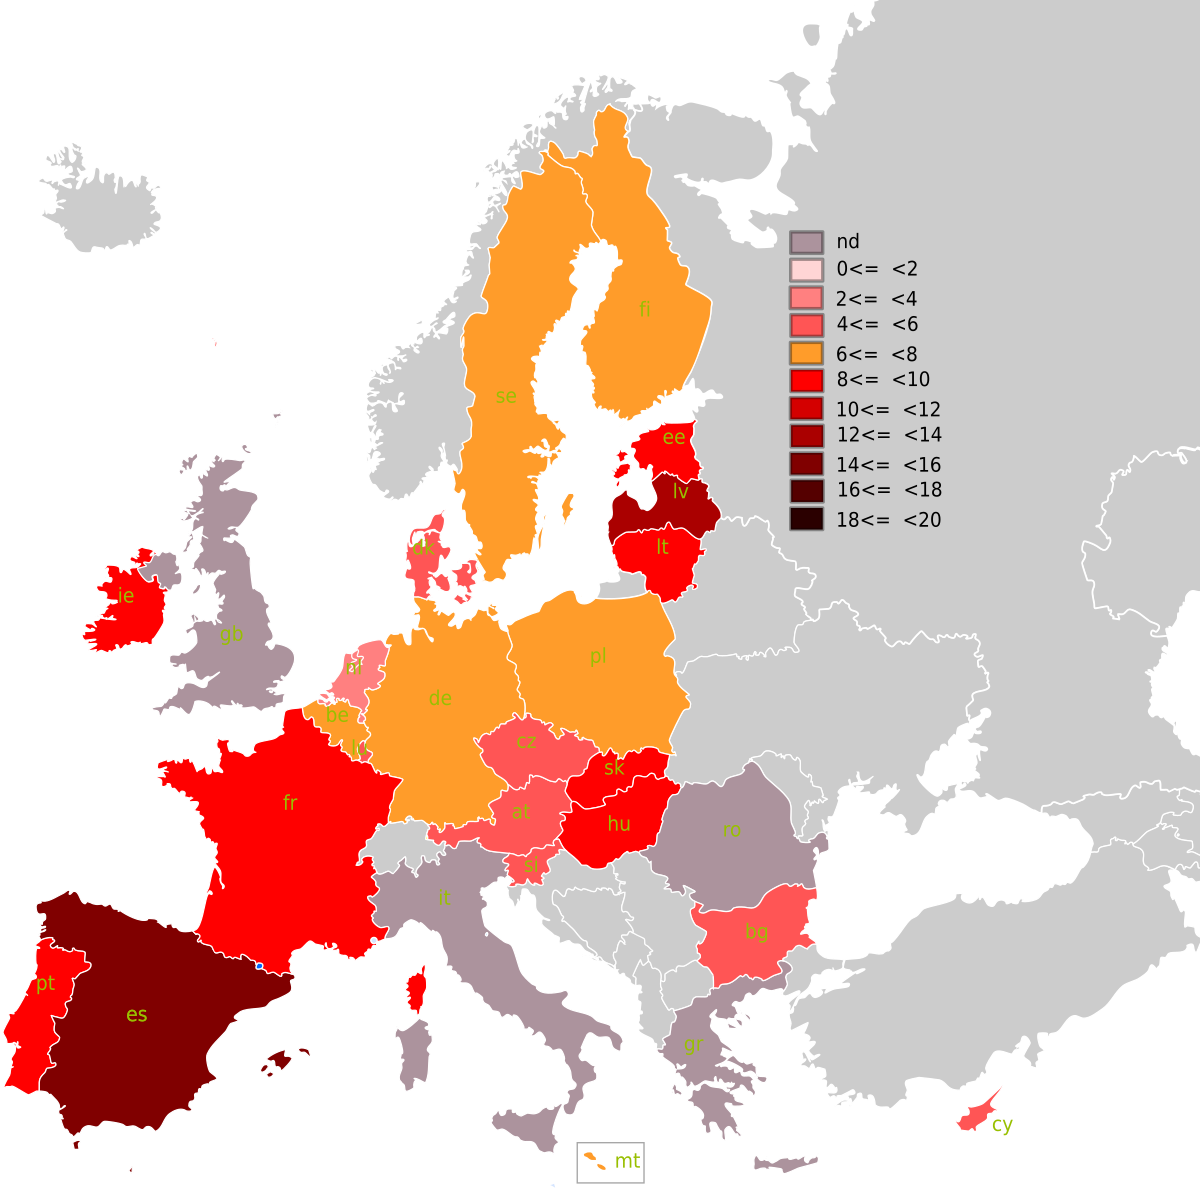 File:Registered unemployment rate EU-27 map.svg - Wikimedia Commons